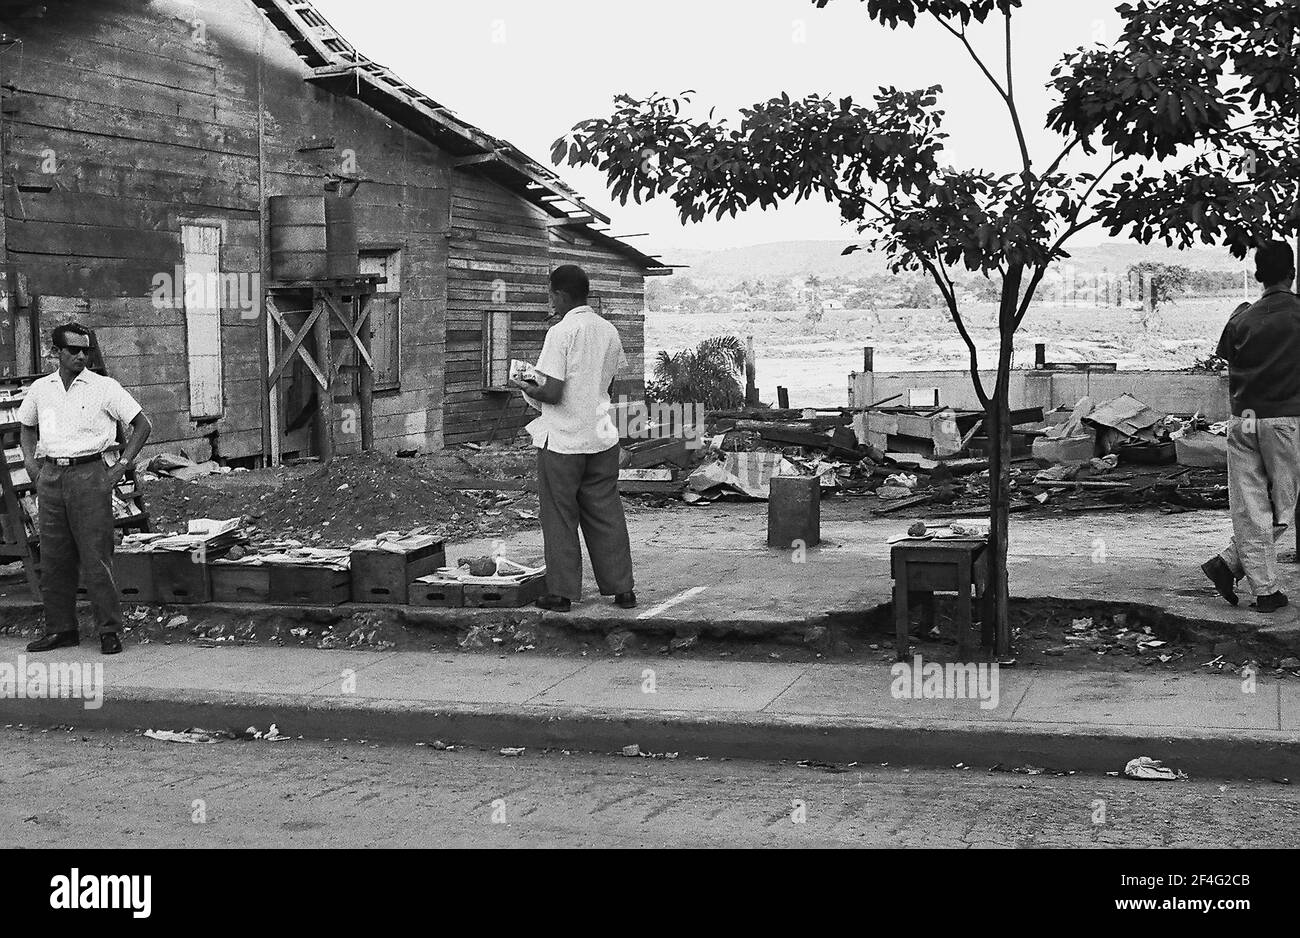 Pinalito after mudslide with people selling items in makeshift market stalls beside rubble, Pinalito, Santiago de Cuba, Cuba, 1963. From the Deena Stryker photographs collection. () Stock Photo